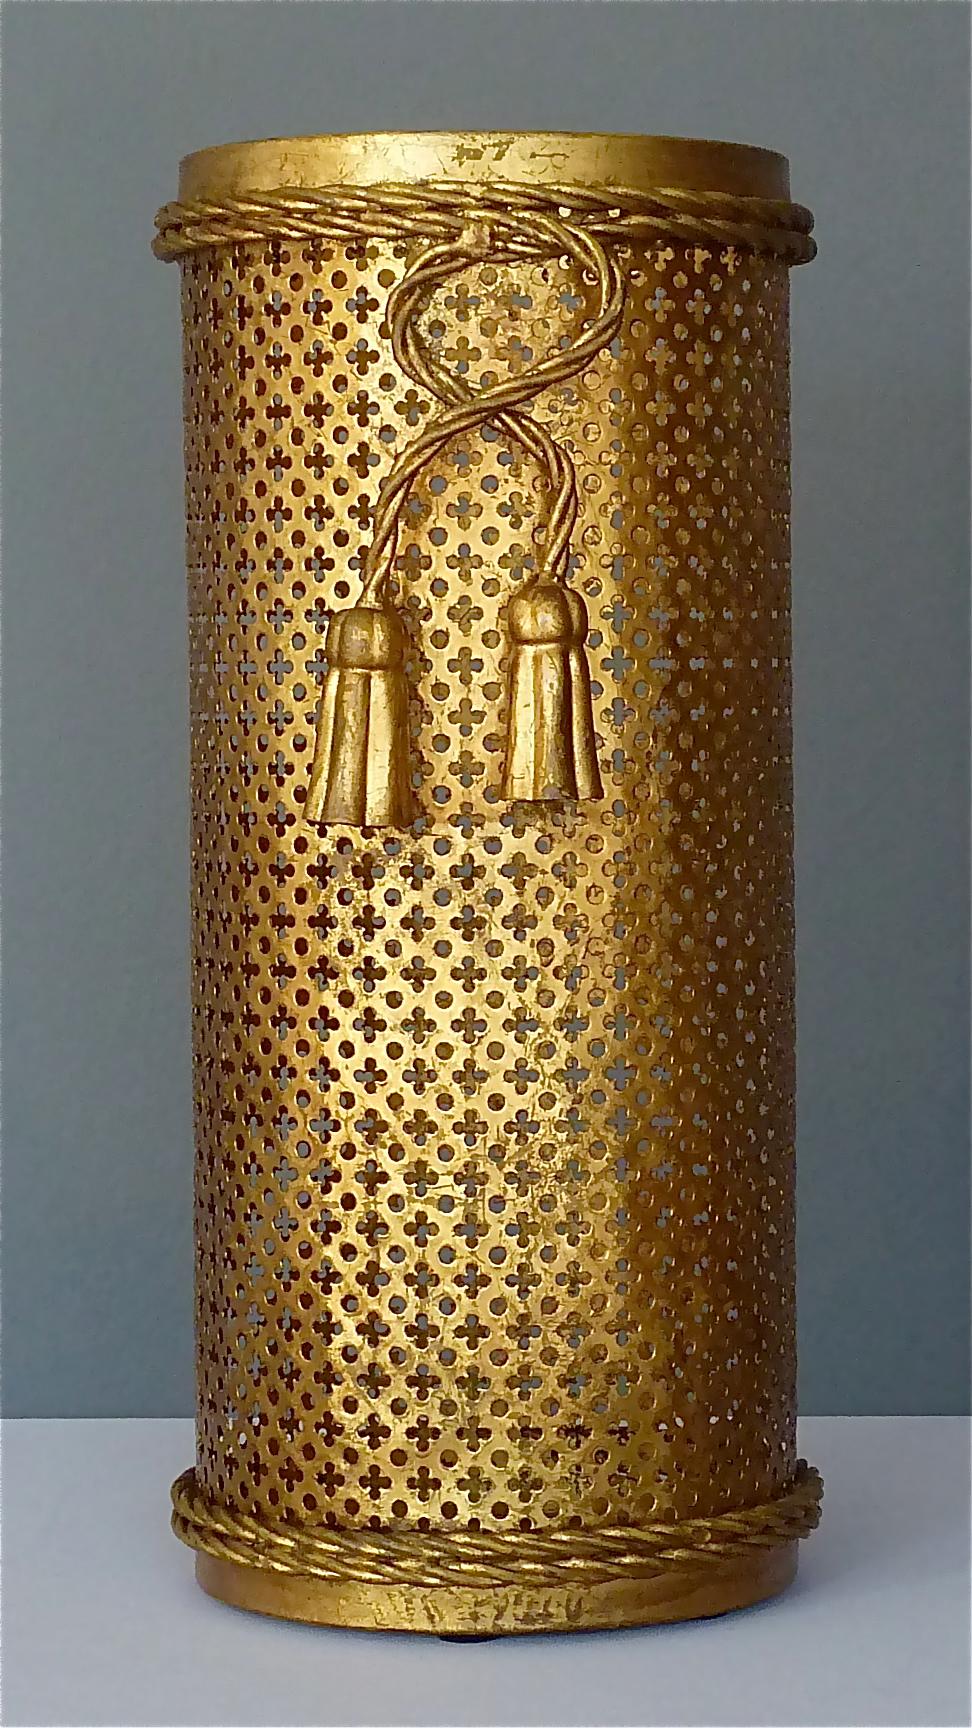 Italian Midcentury Umbrella Stand Gilt Perforated Metal, Hans Kögl Style, 1950s For Sale 8